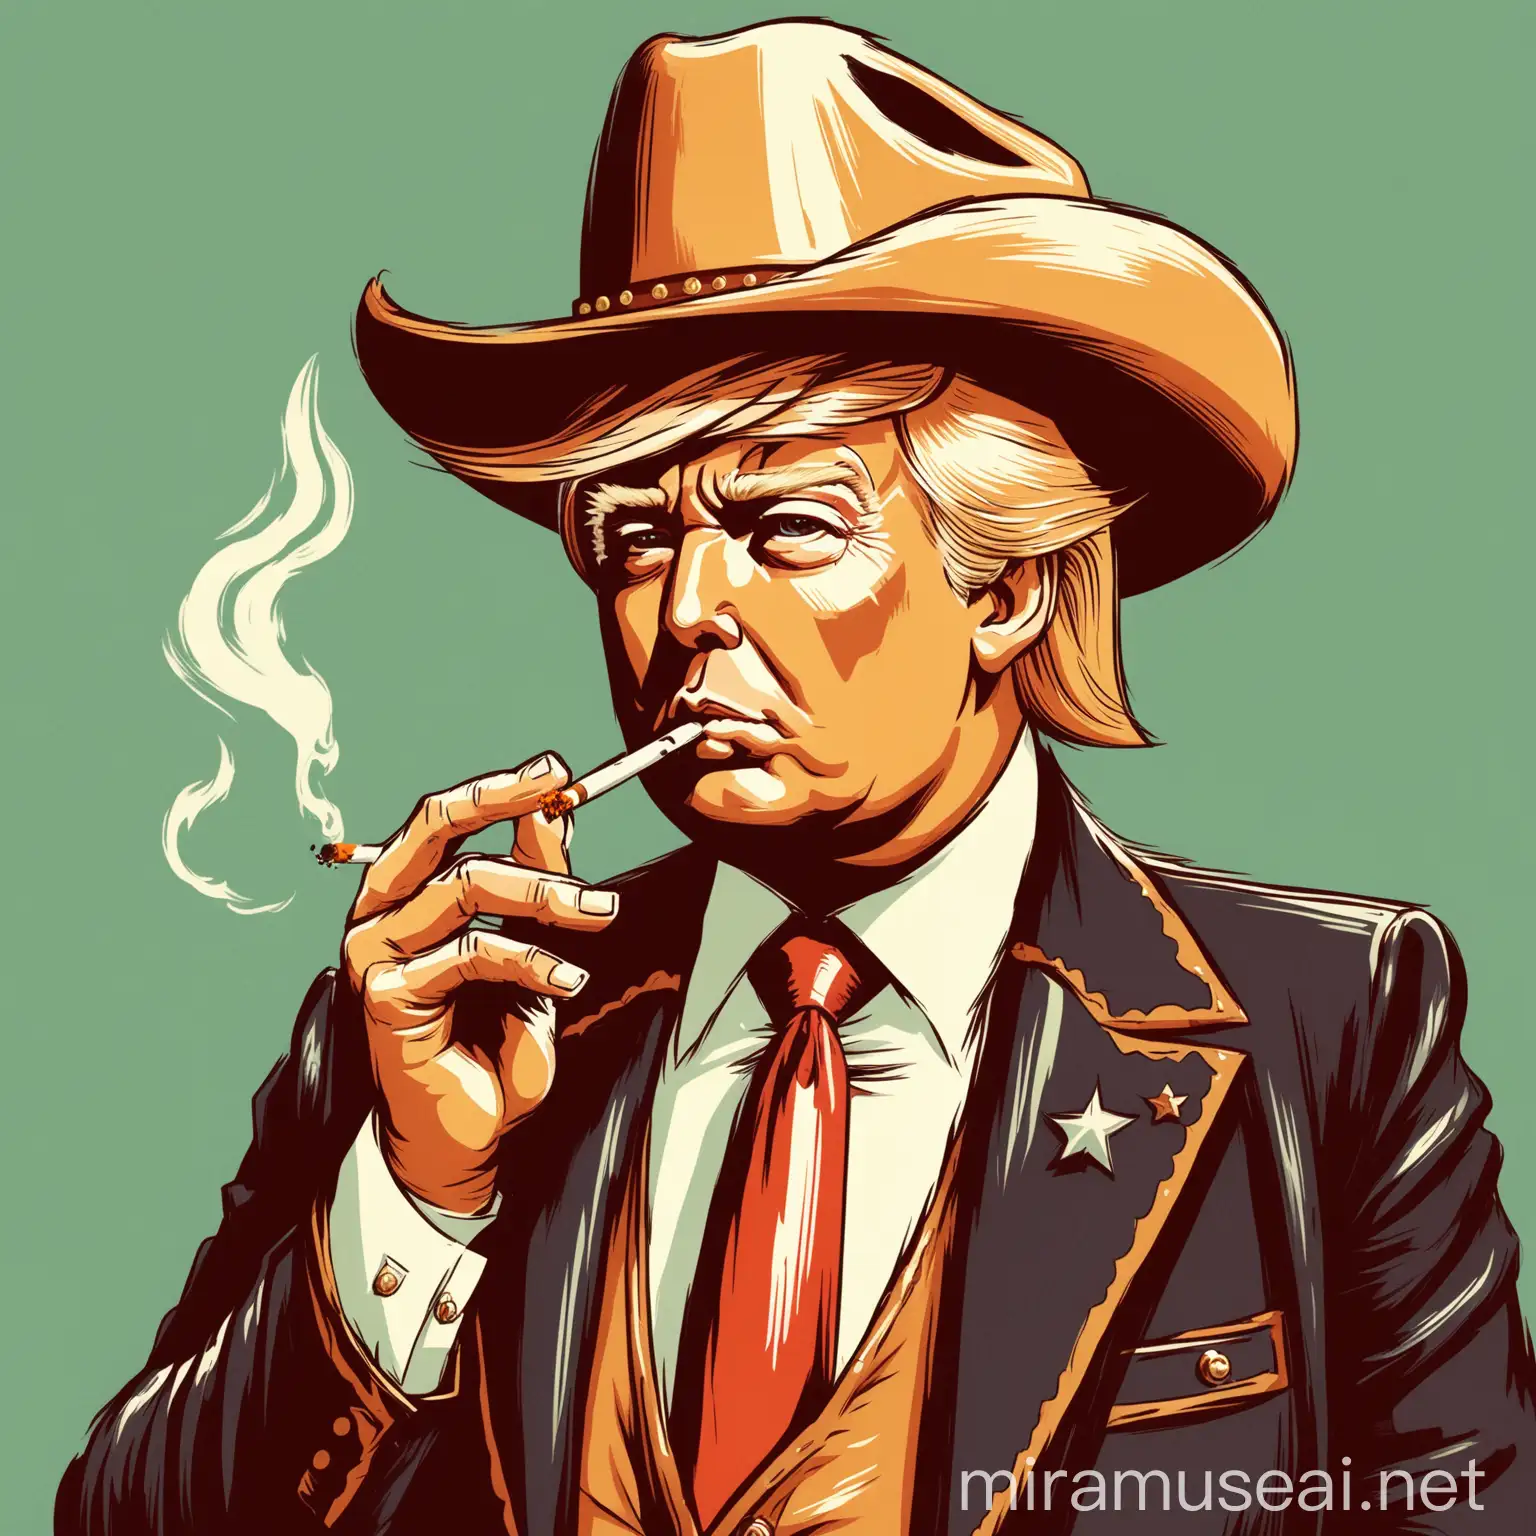 Retro Illustration of Donald Trump in Cowboy Outfit with Cigarette